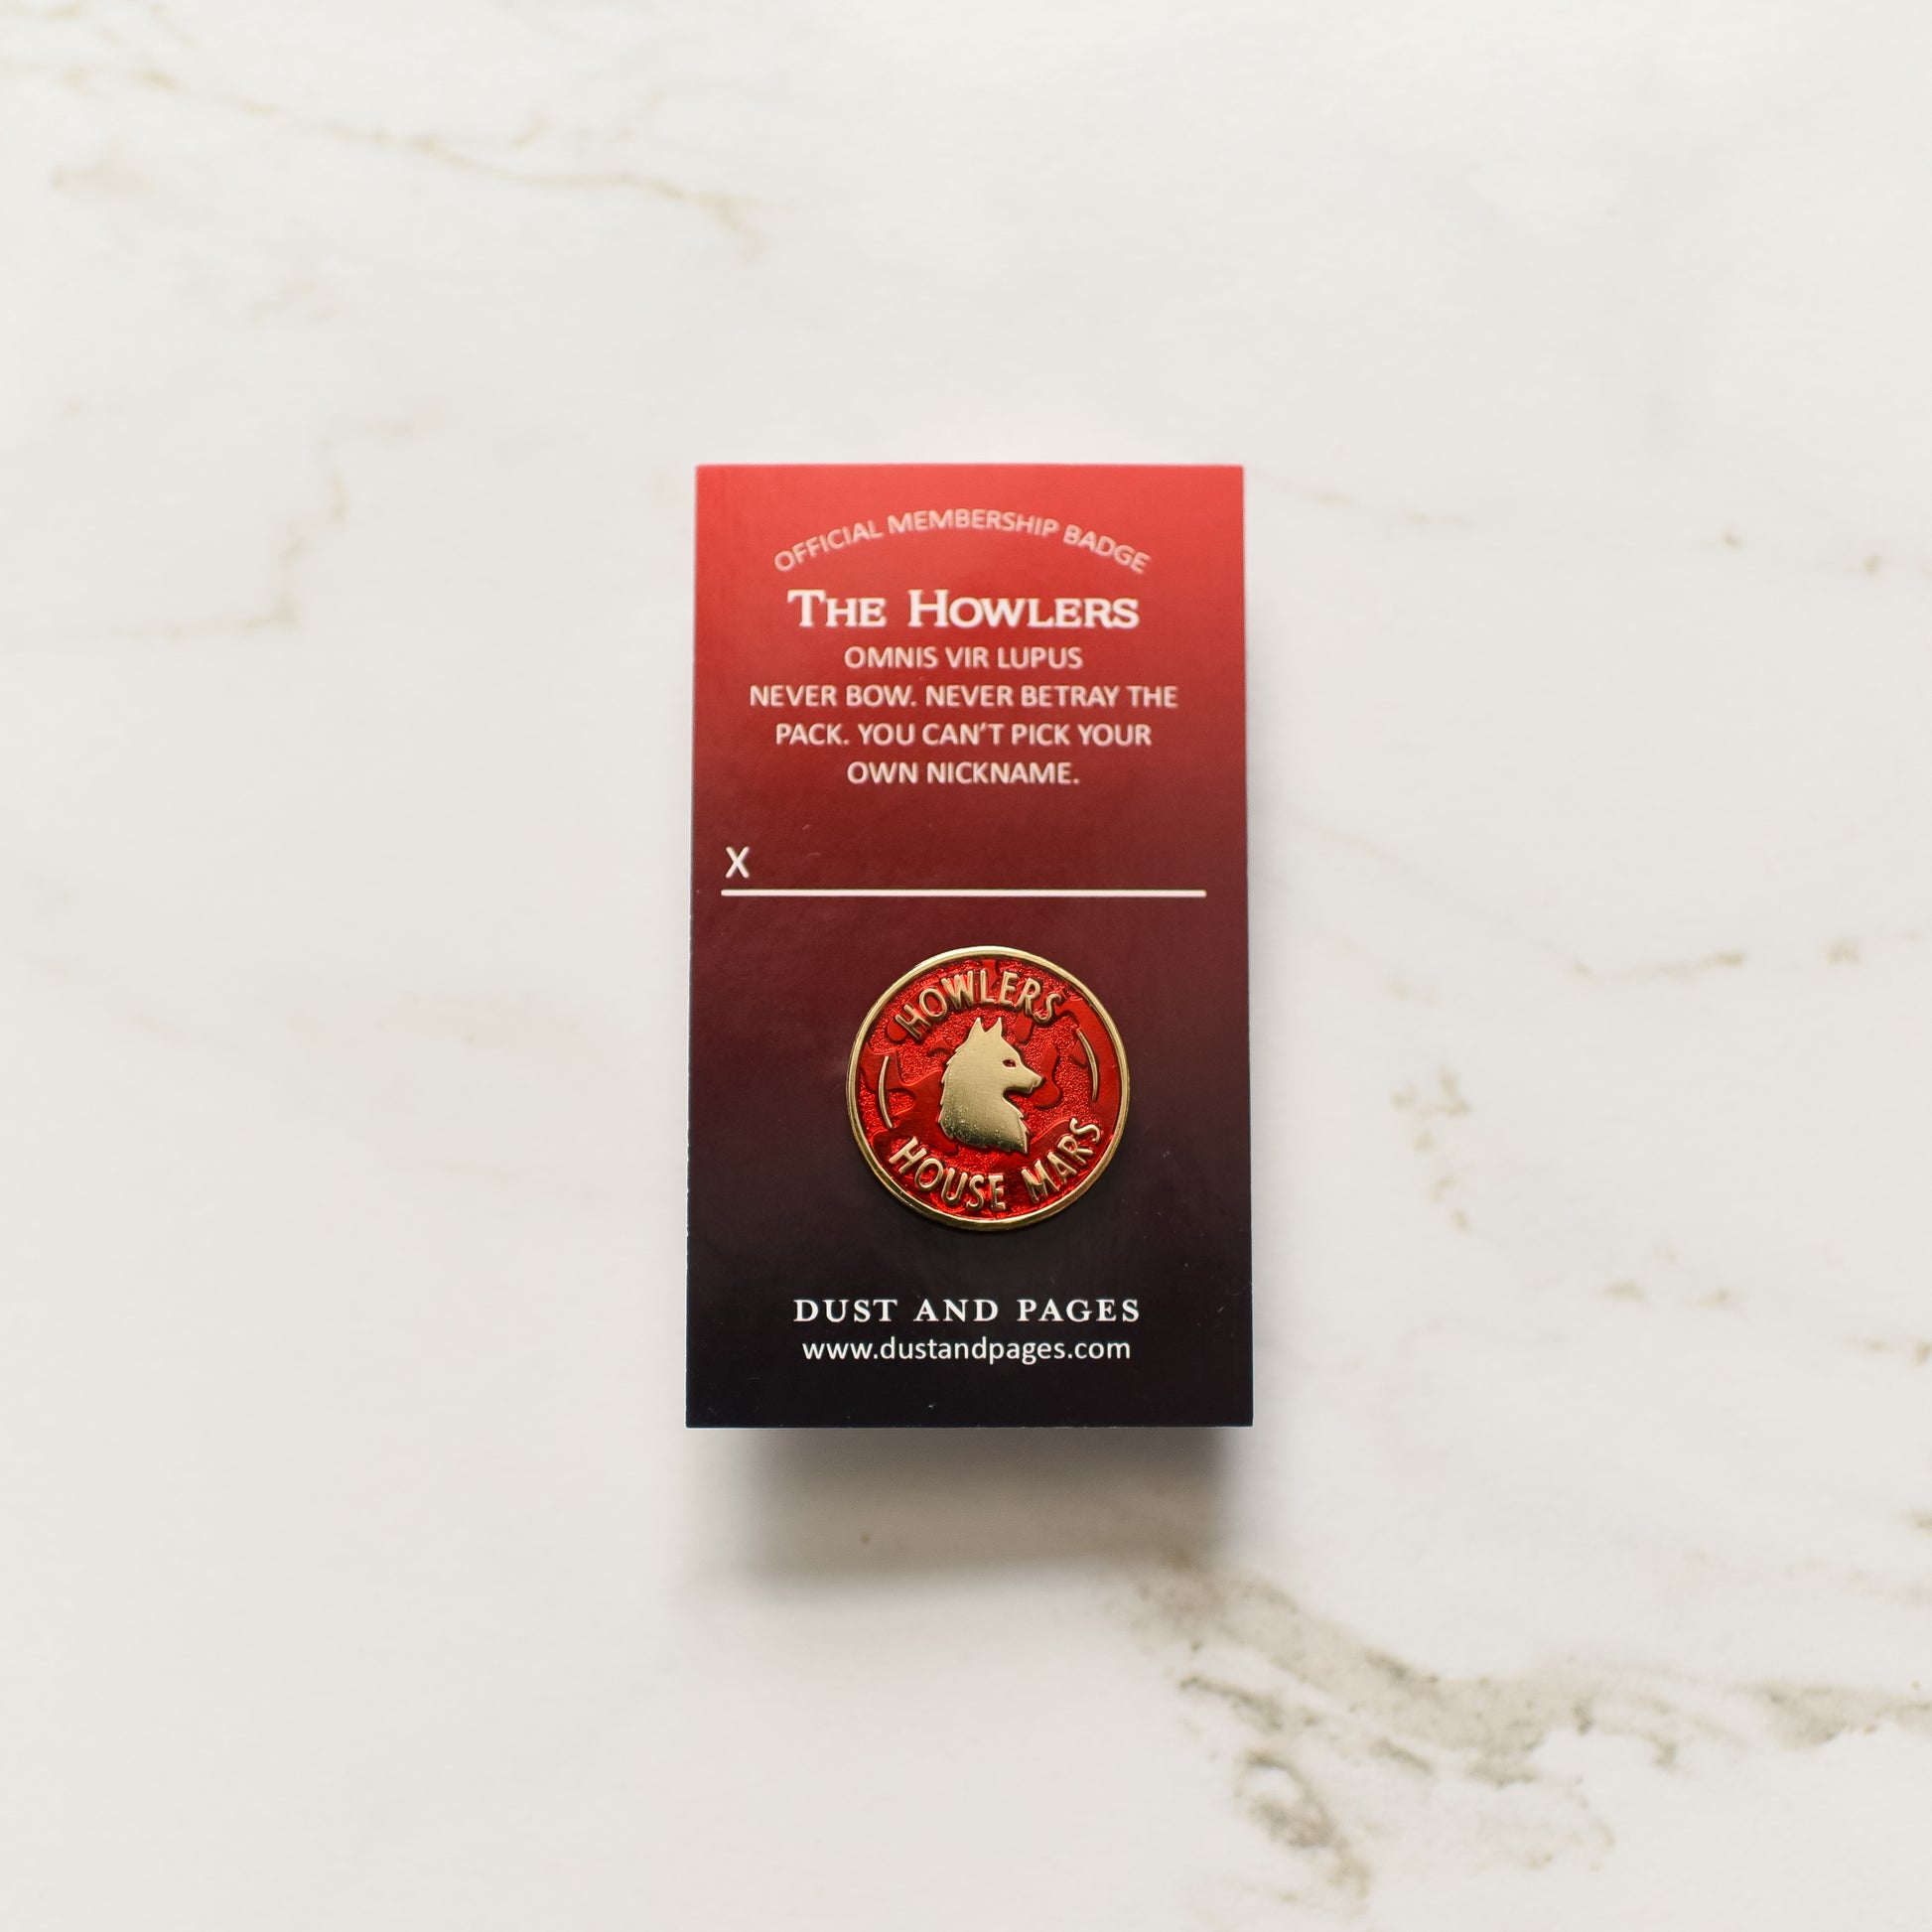 Red and gold circle membership style enamel pin with a wolf and howler house mars text on a red and black gradient card